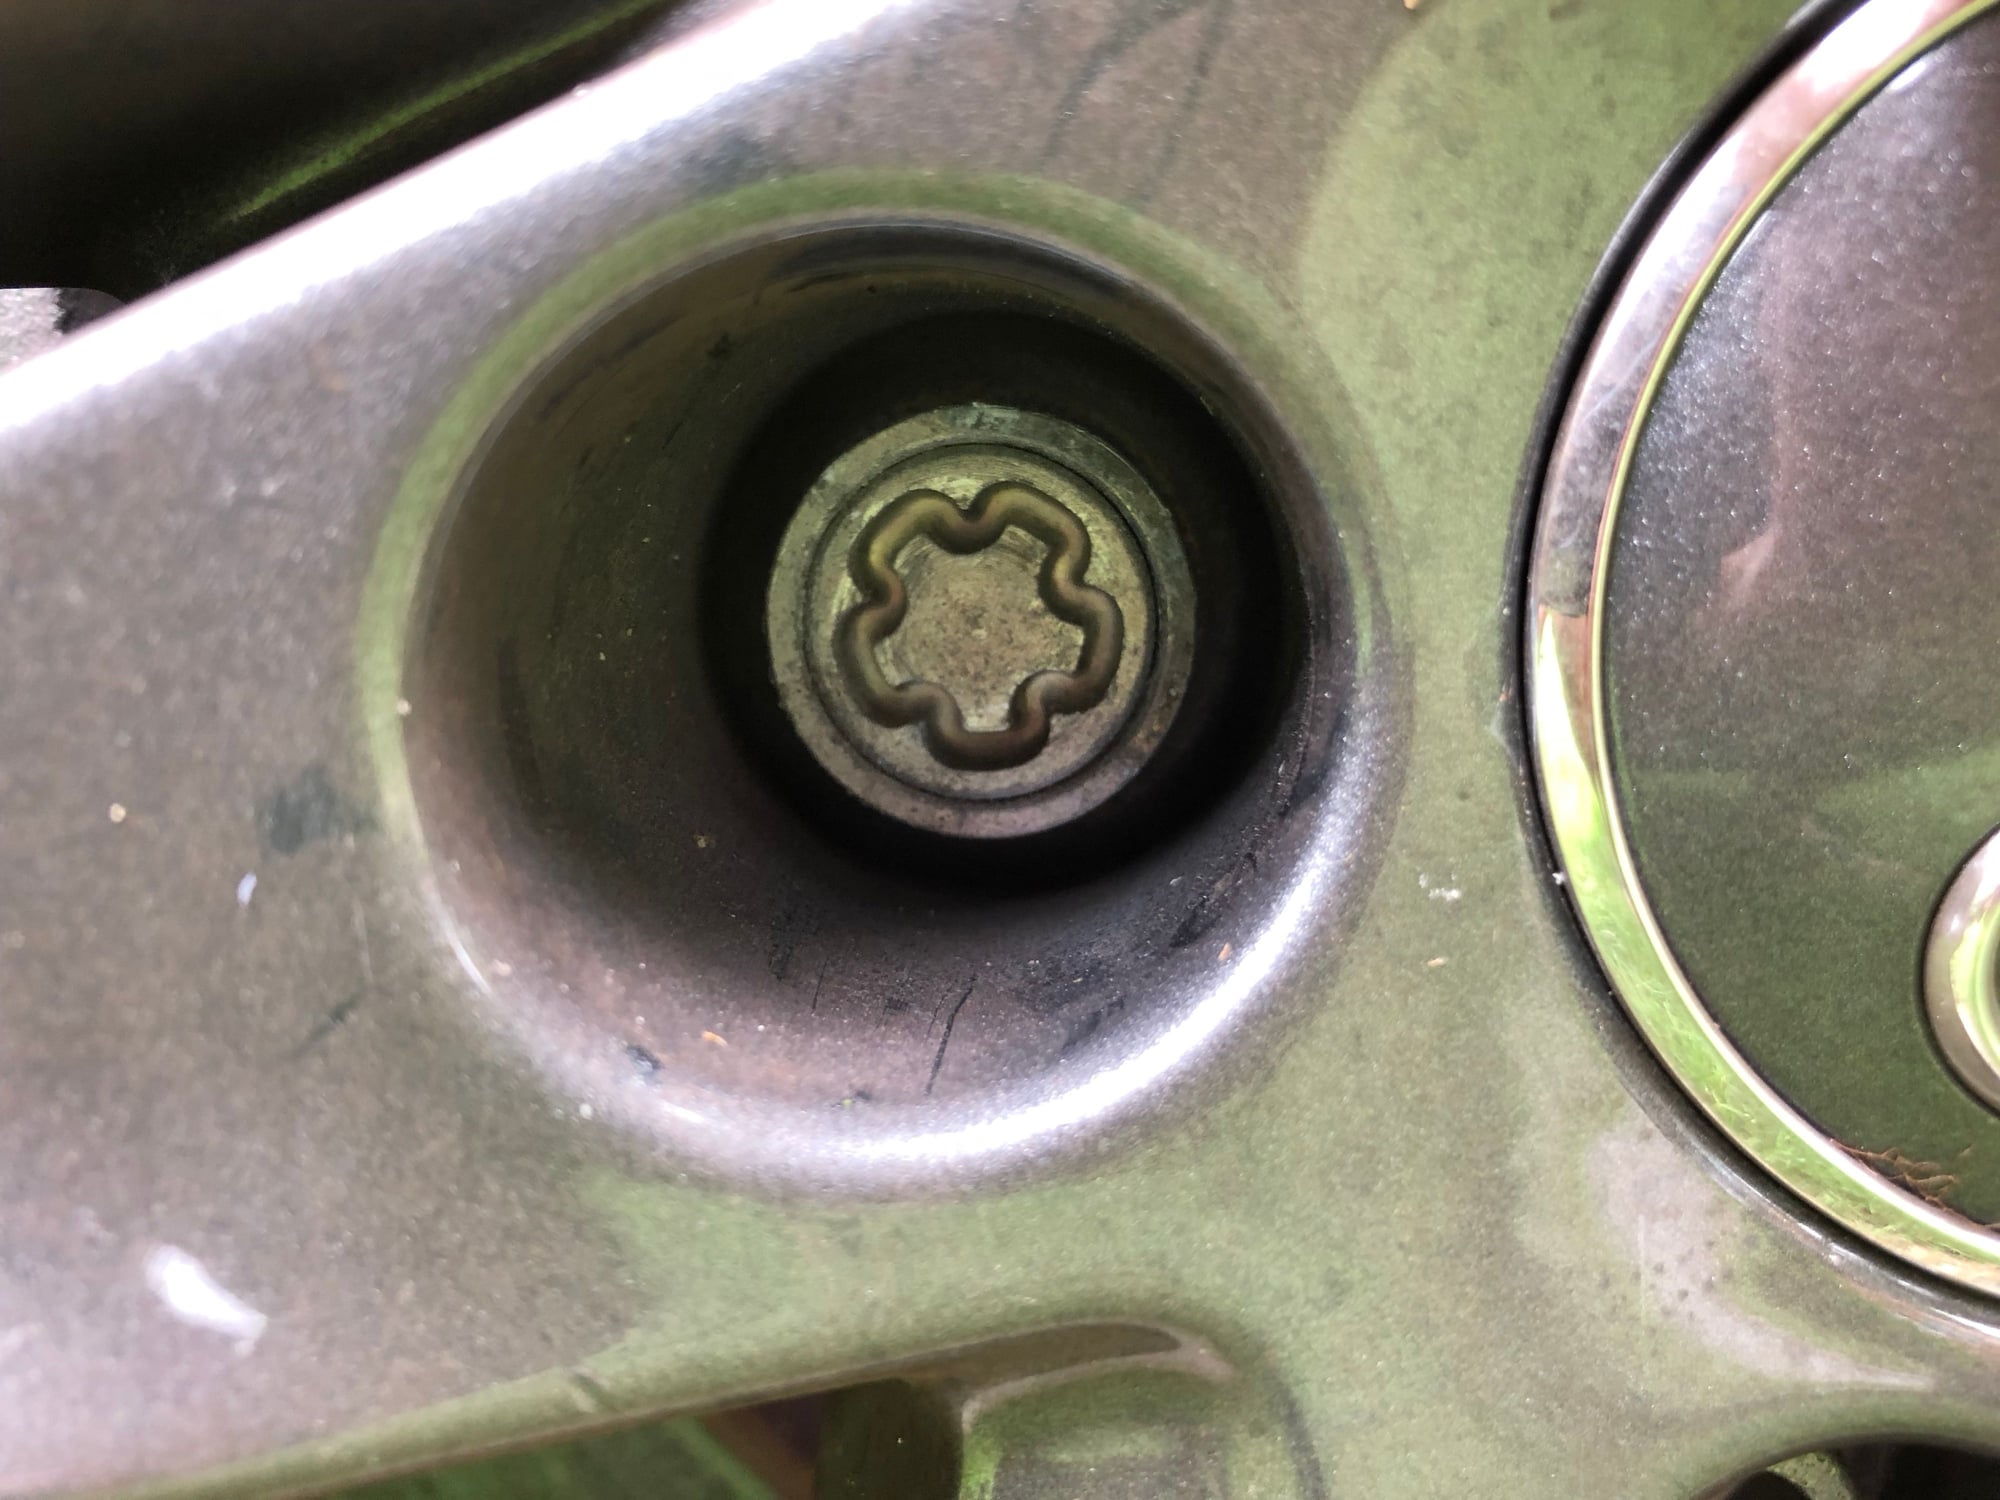 I've lost my locking wheel nut key — how can I change a flat tyre?